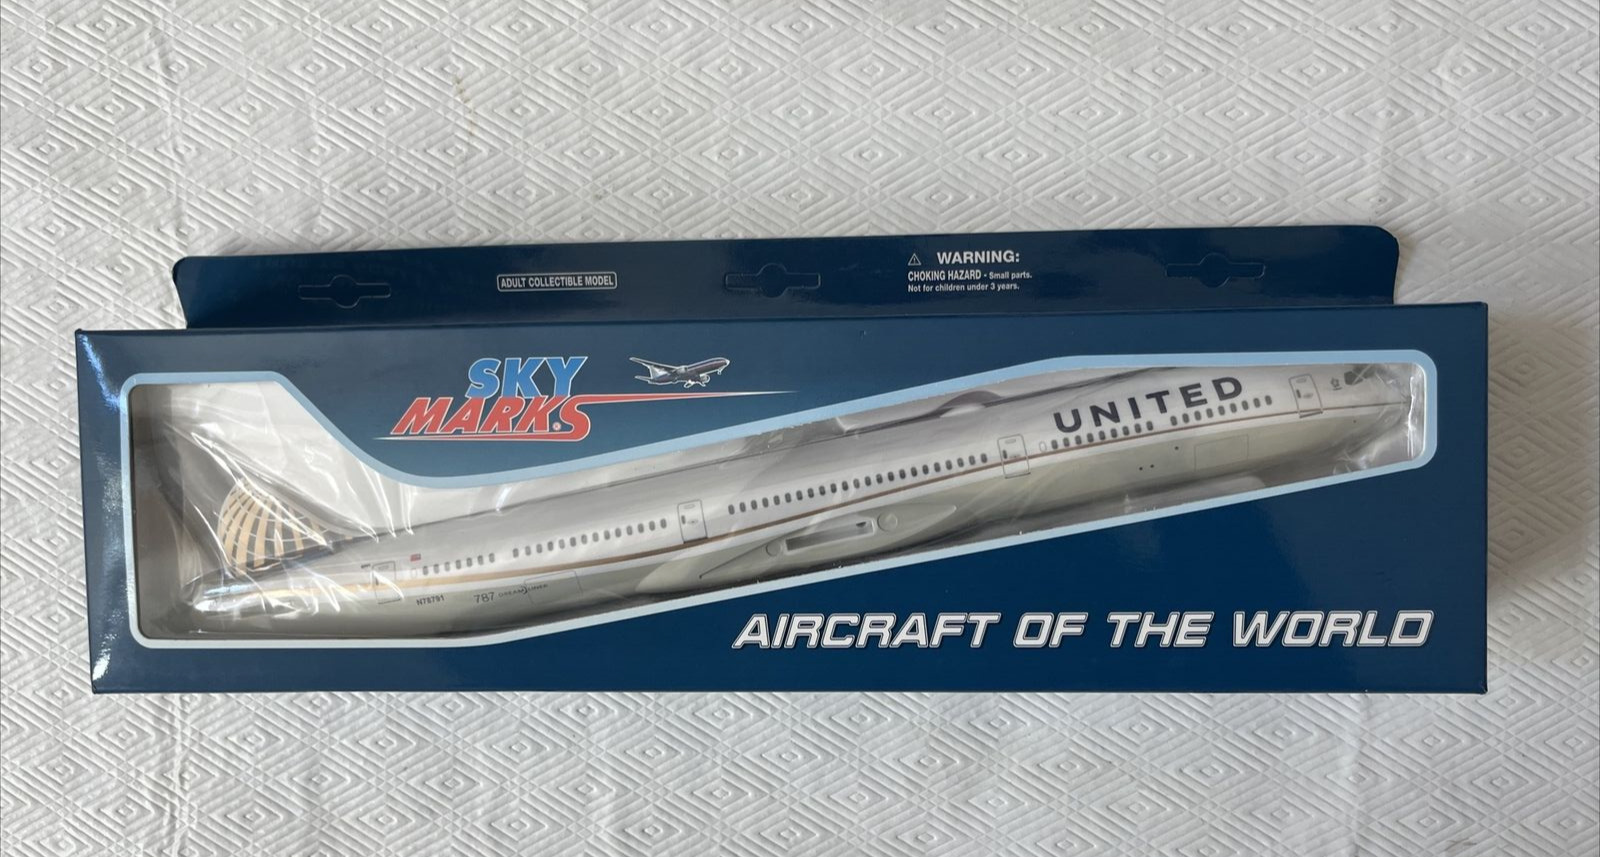 SKY MARKS AIRCRAFT OF THE WORLD UNITED AIRLINES PLANE NIB B787-10 1:200 scale